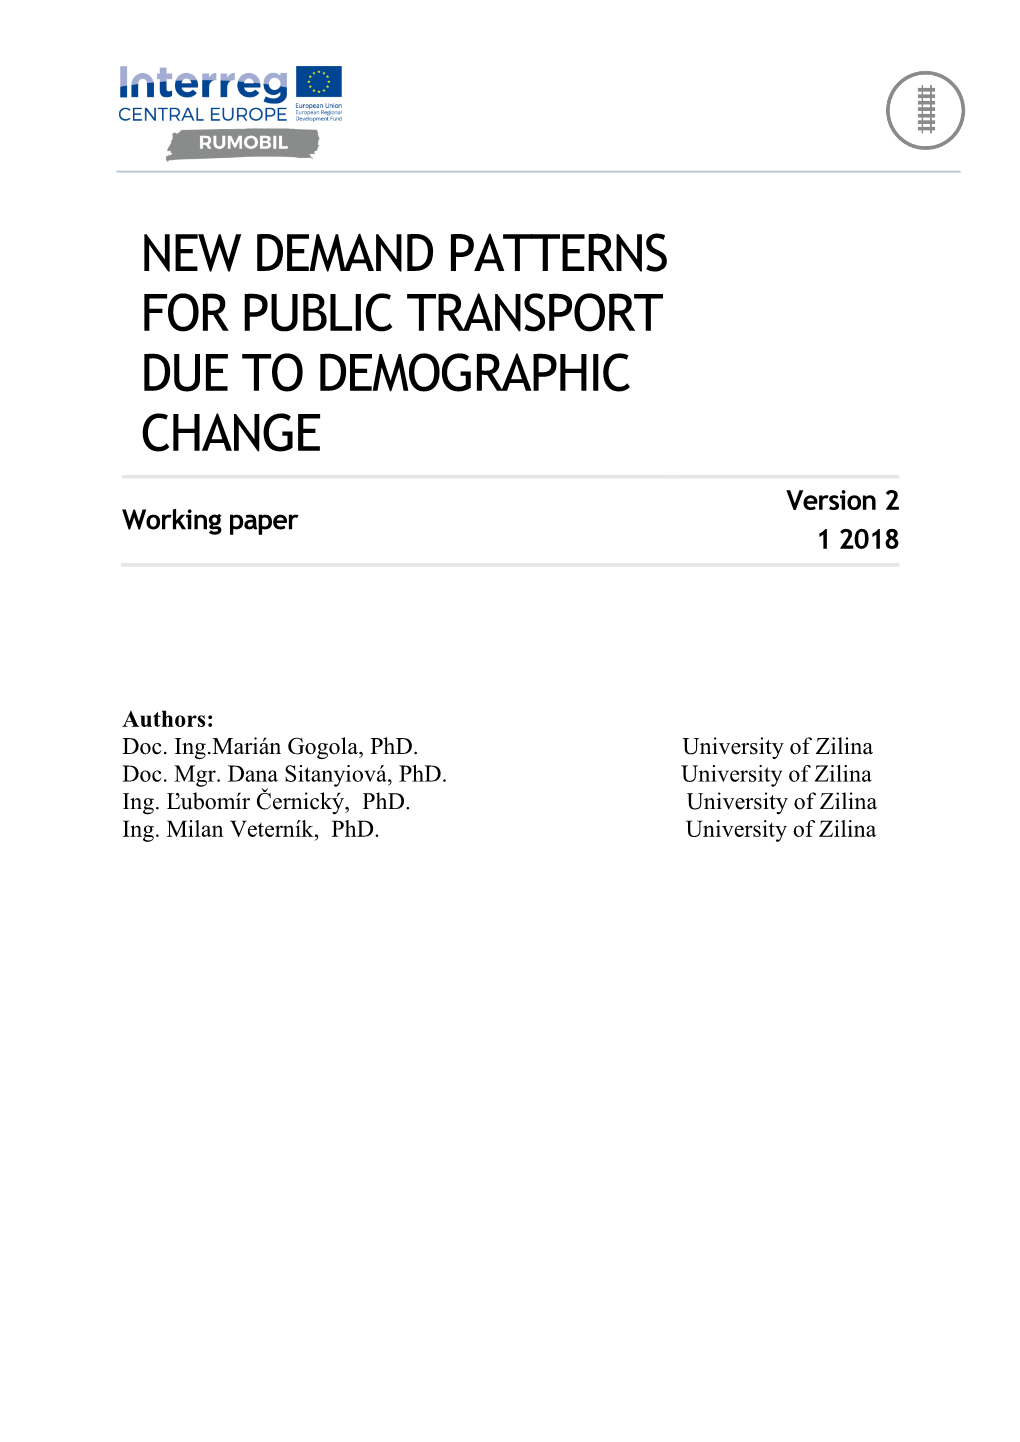 New Patterns in Public Transport Demand Due to Demographic Change